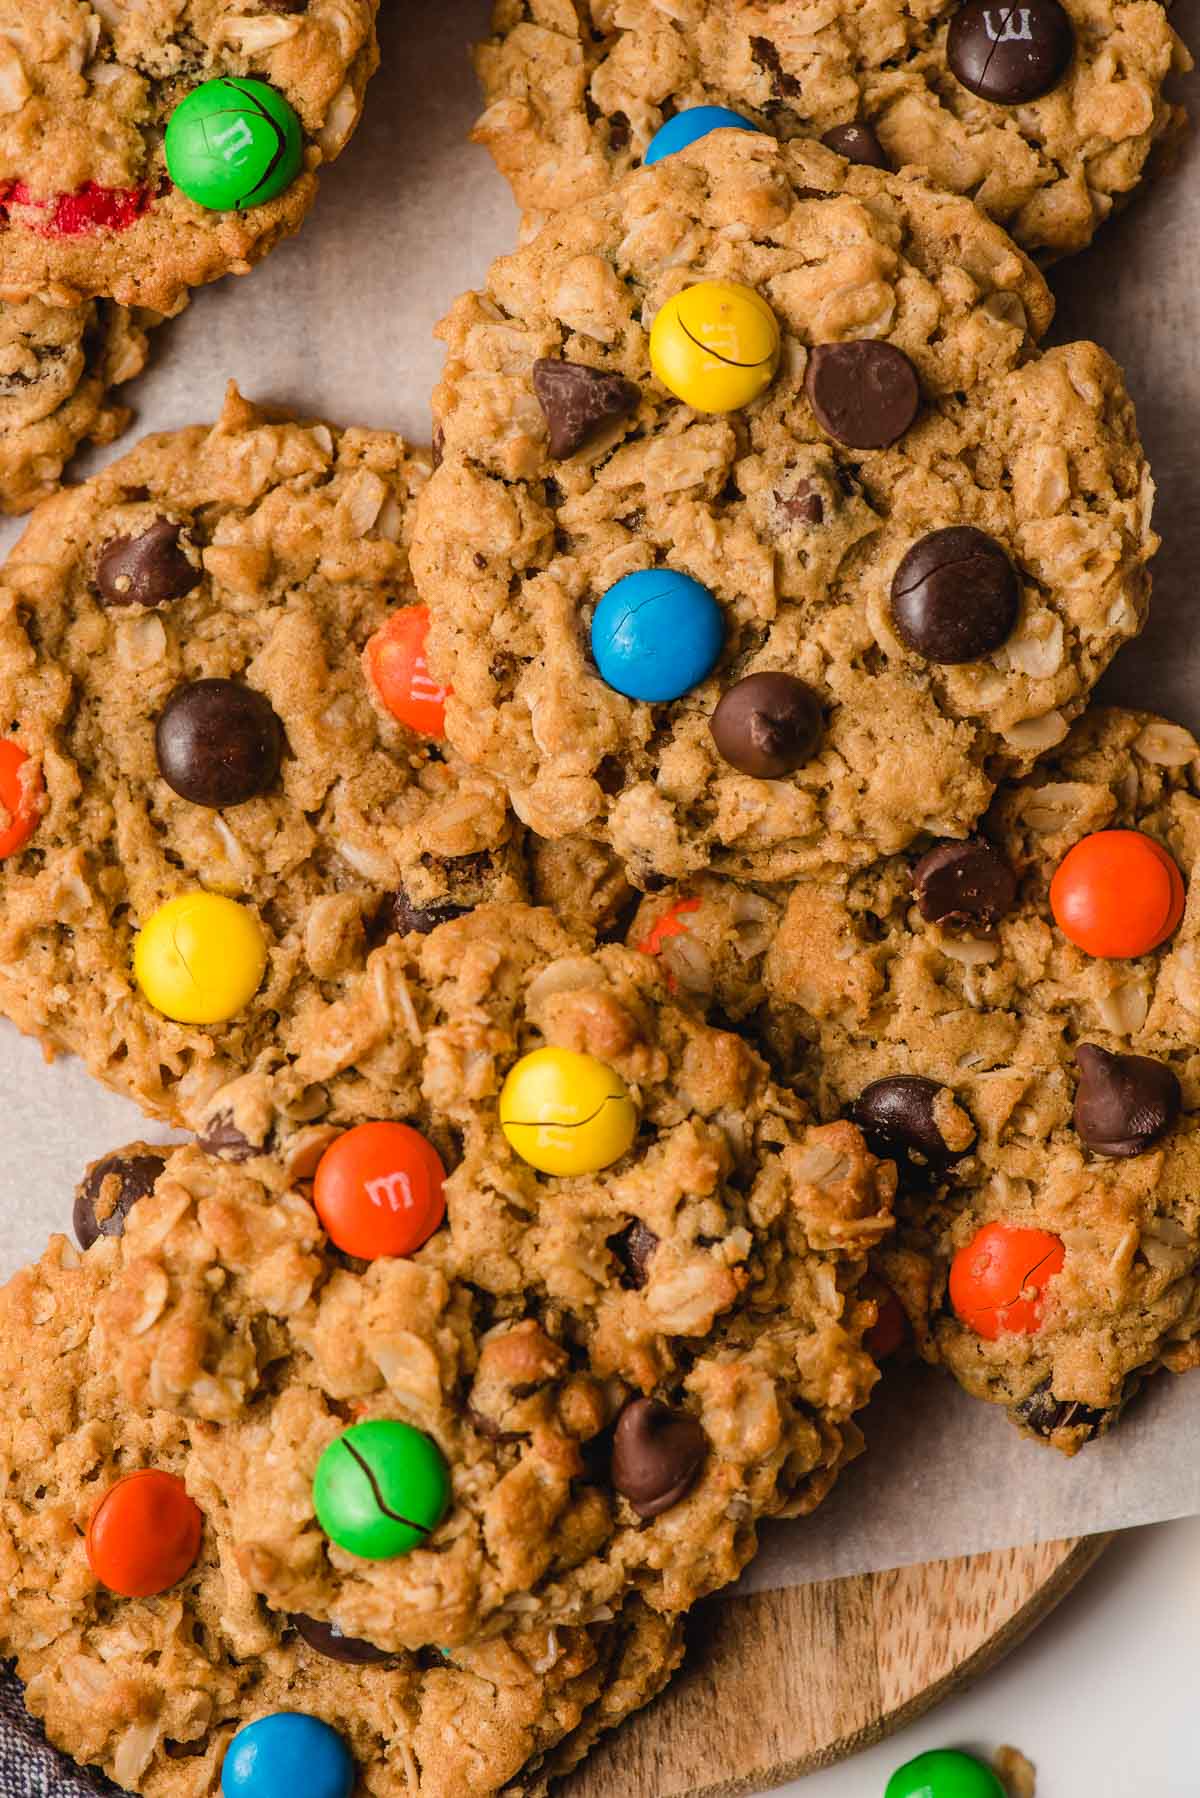 A pile of Gluten Self-ruling Monster Cookies with M&Ms.